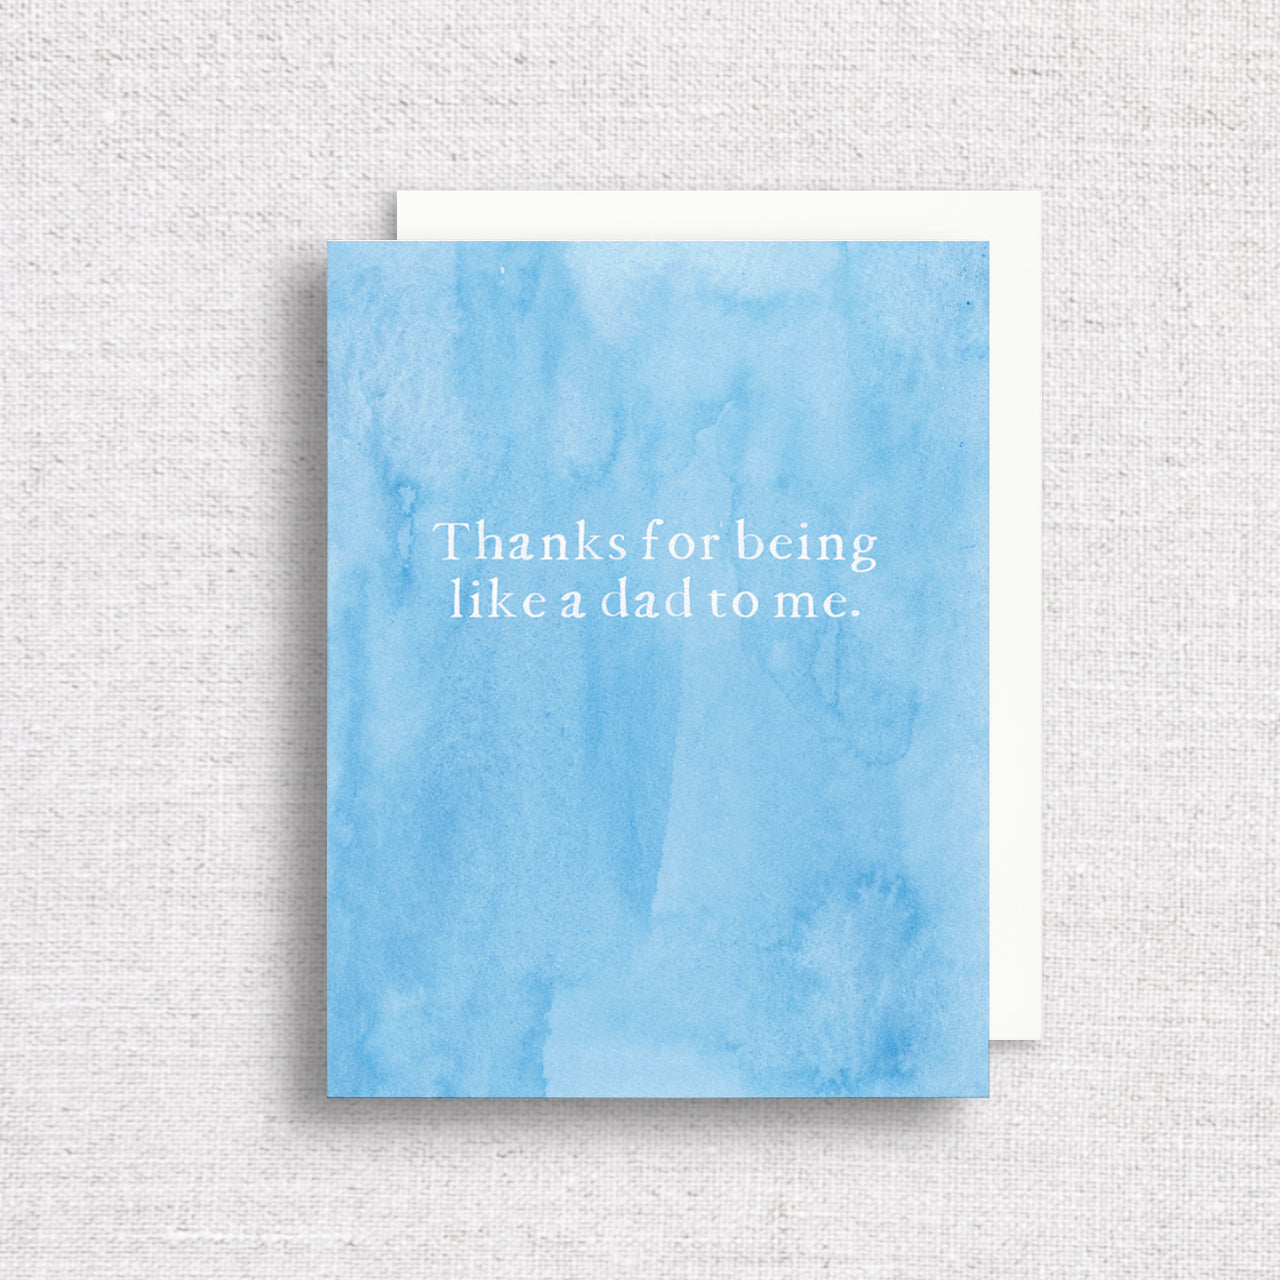 Thanks for Being Like a Dad to Me Greeting Card by Gert & Co